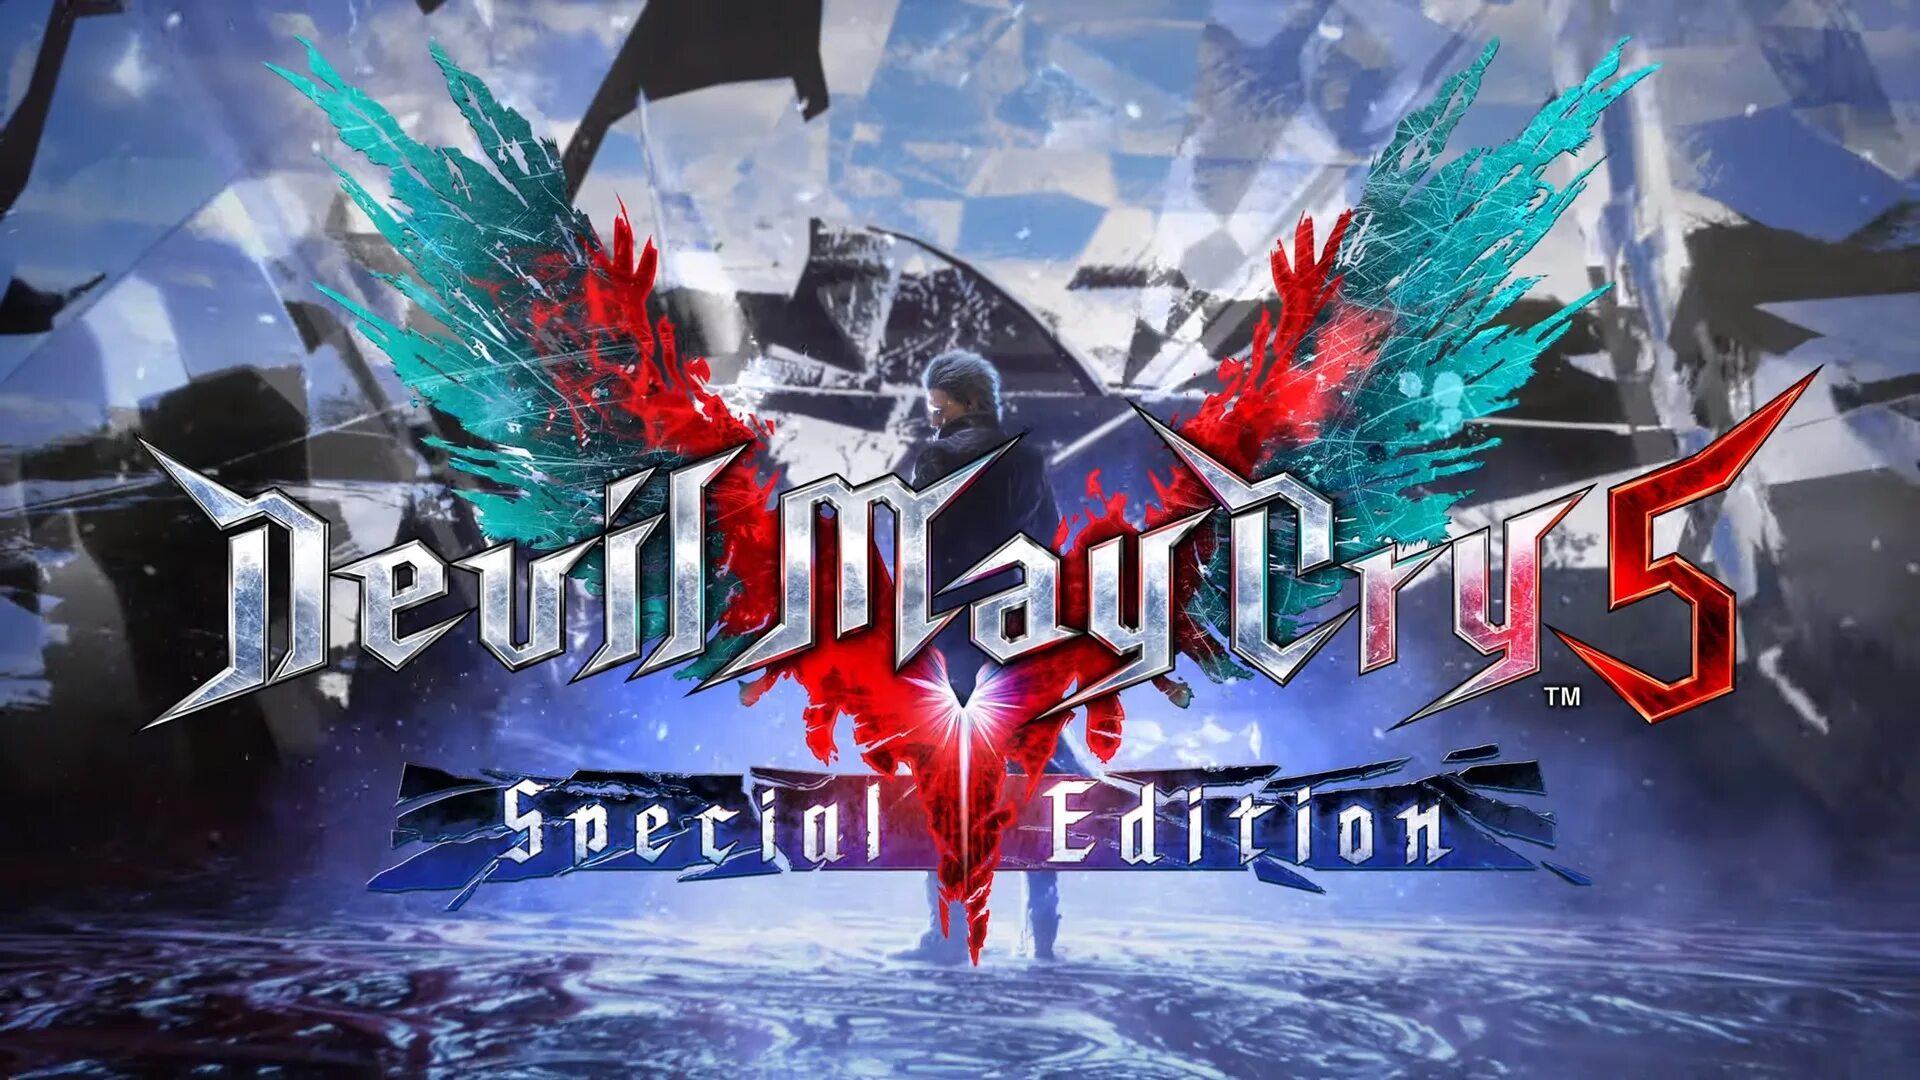 Devil May Cry 5 Special Edition. Devil May Cry 5 Special Edition ps5. Devil May Cry 5 Special Edition Xbox. Devil May Cry 5 Deluxe Edition.